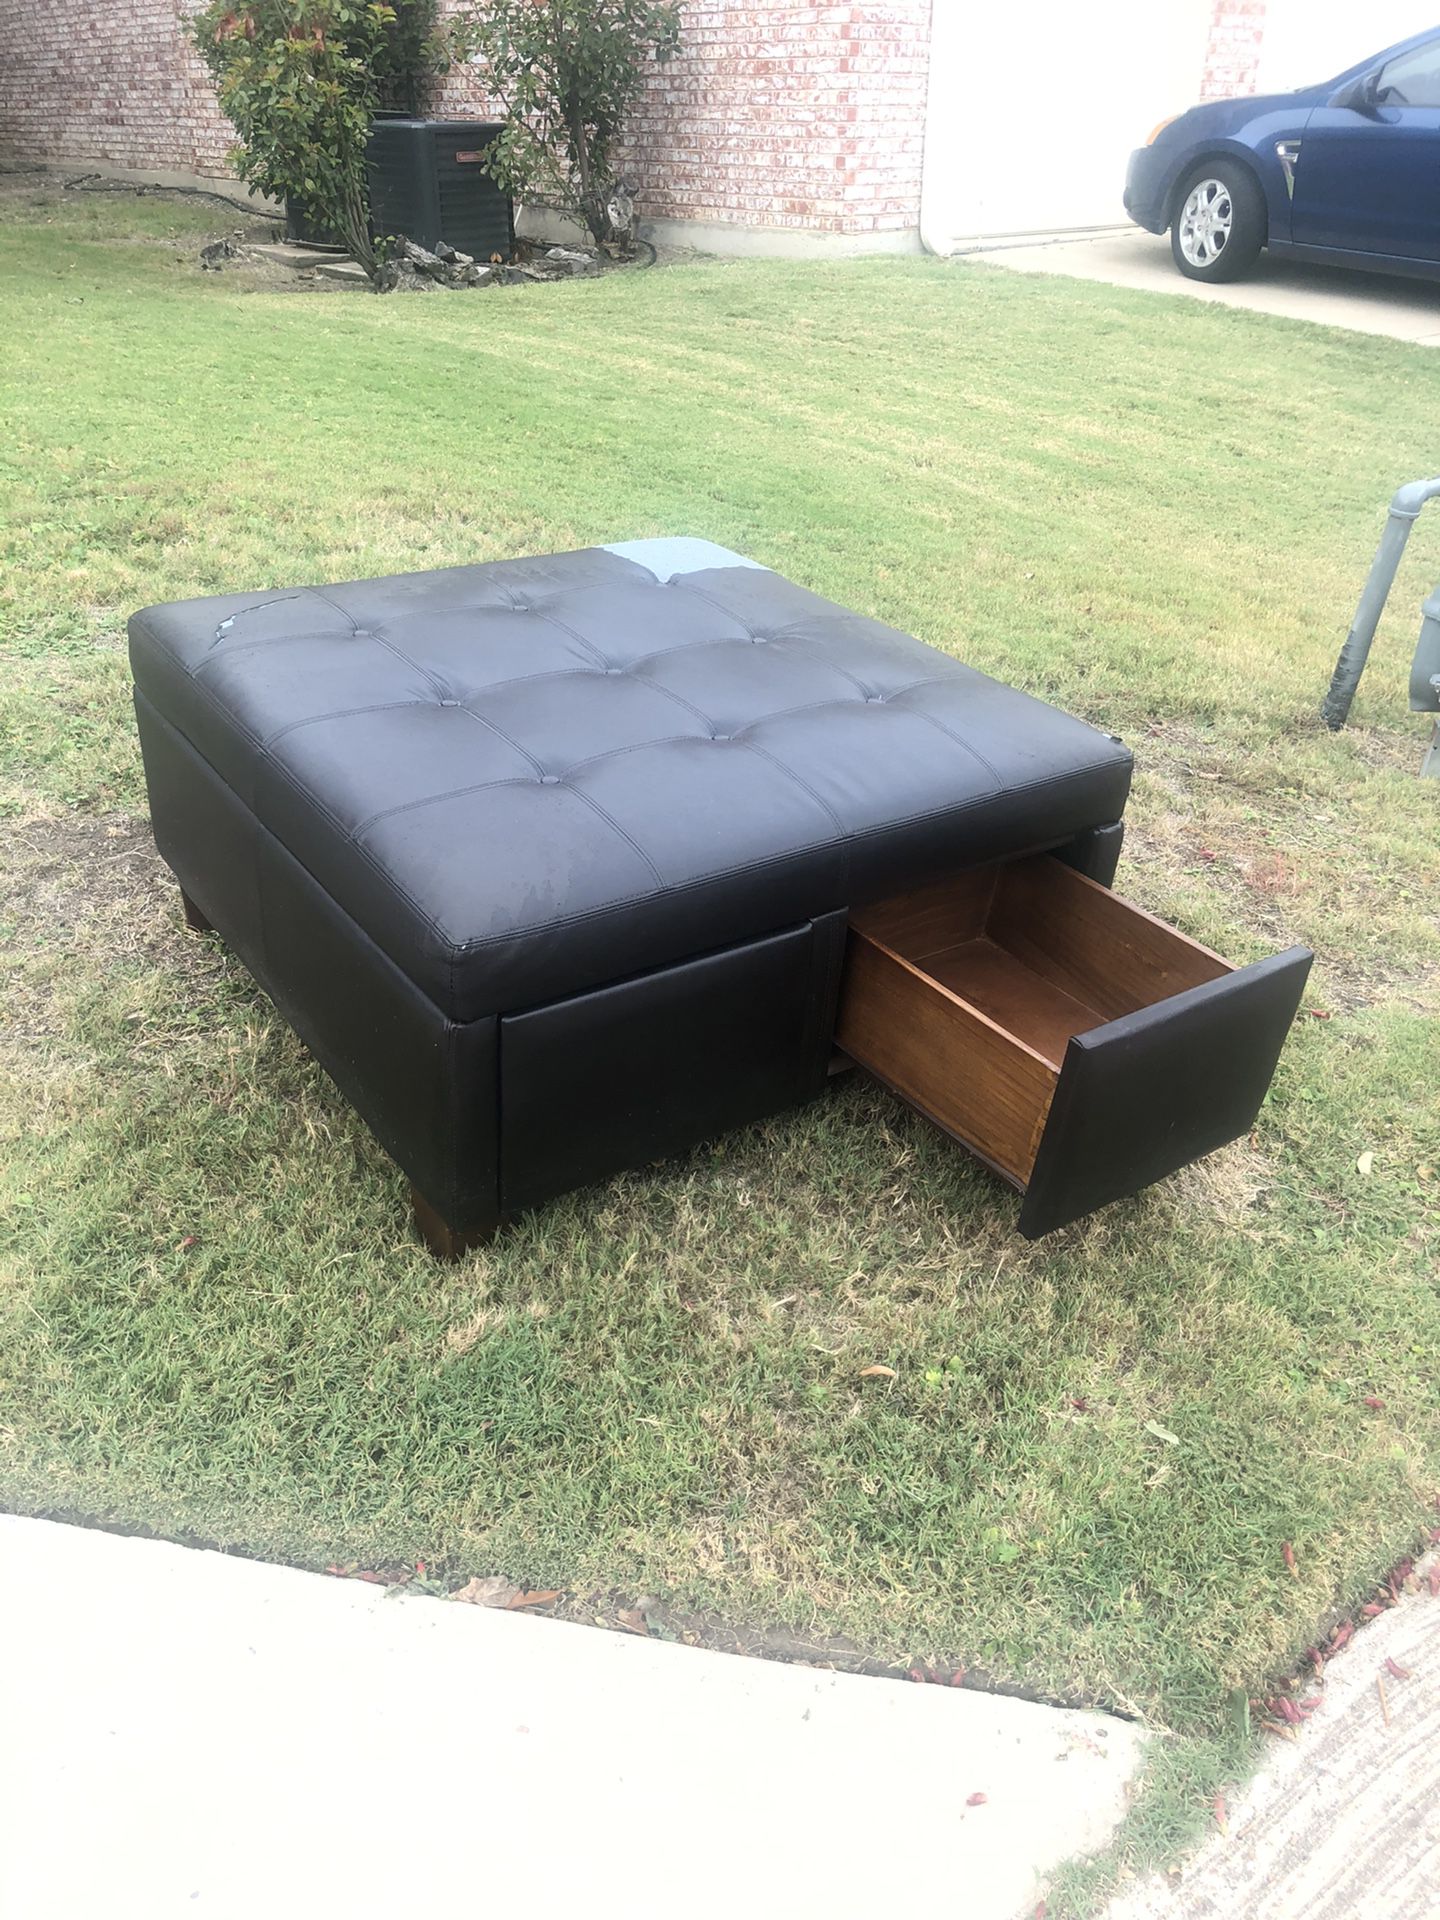 Free ottoman from Ashley’s.